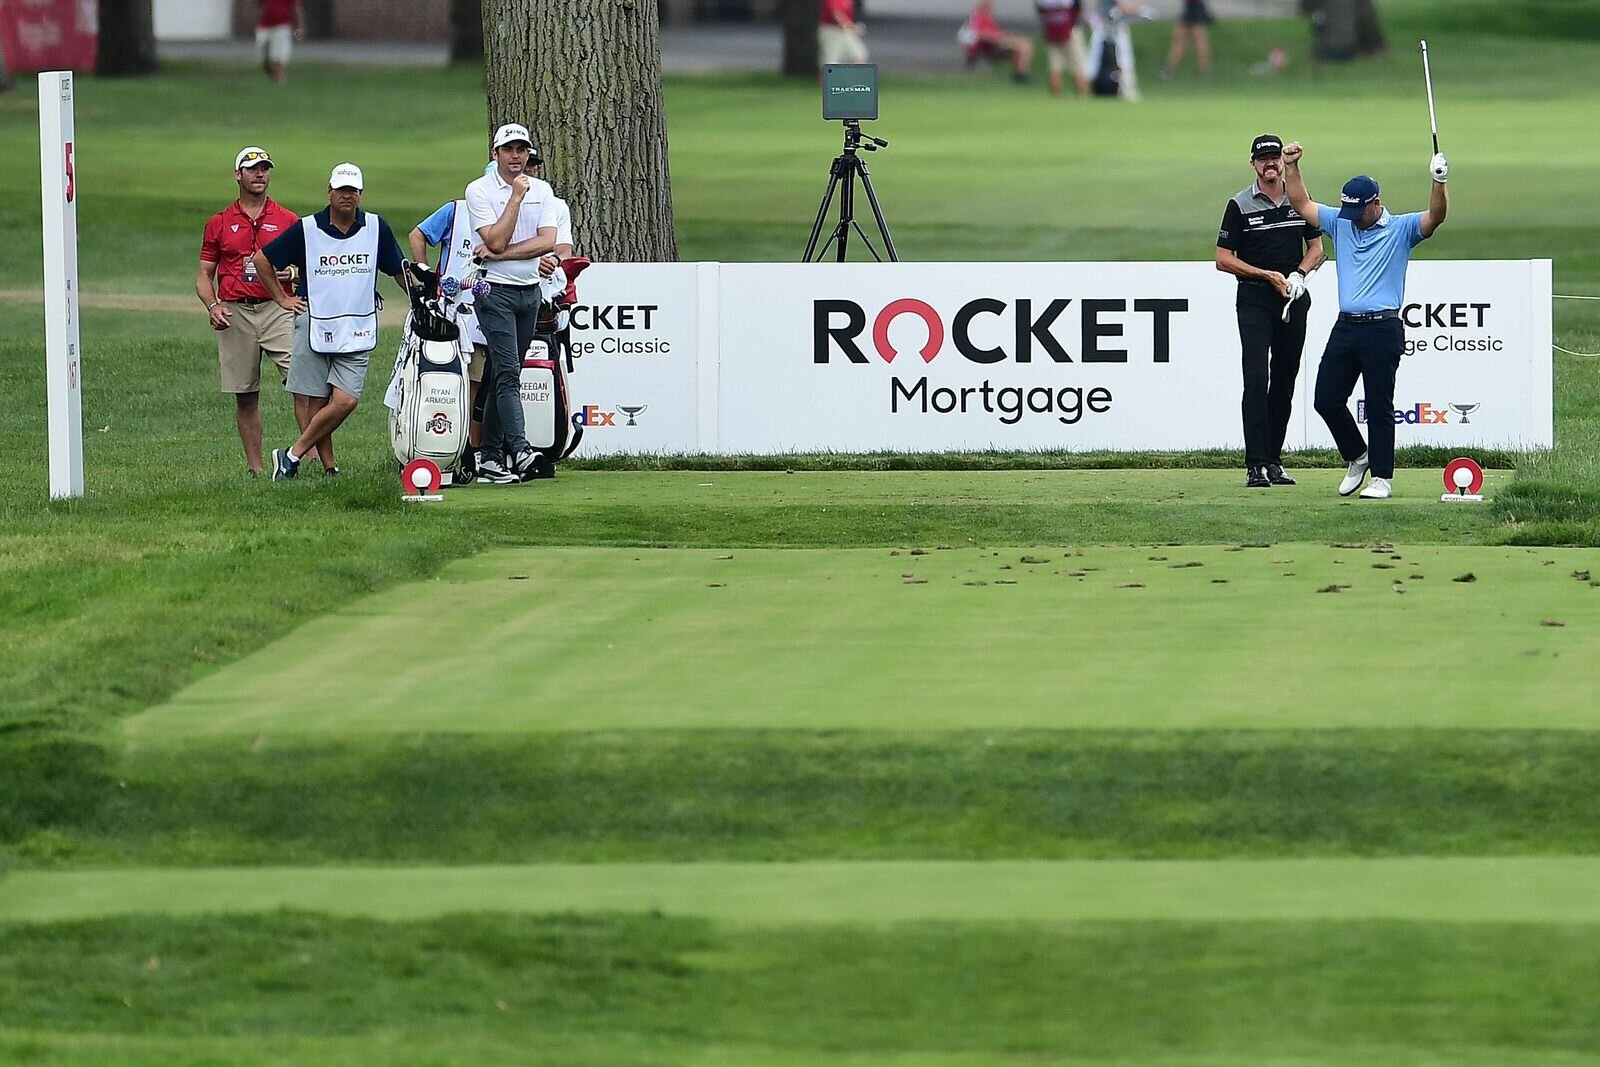  DETROIT, MICHIGAN - JULY 03: Ryan Armour of the United States celebrates his hole in one on the fifth hole during the second round of the Rocket Mortgage Classic on July 03, 2020 at the Detroit Golf Club in Detroit, Michigan. (Photo by Stacy Revere/